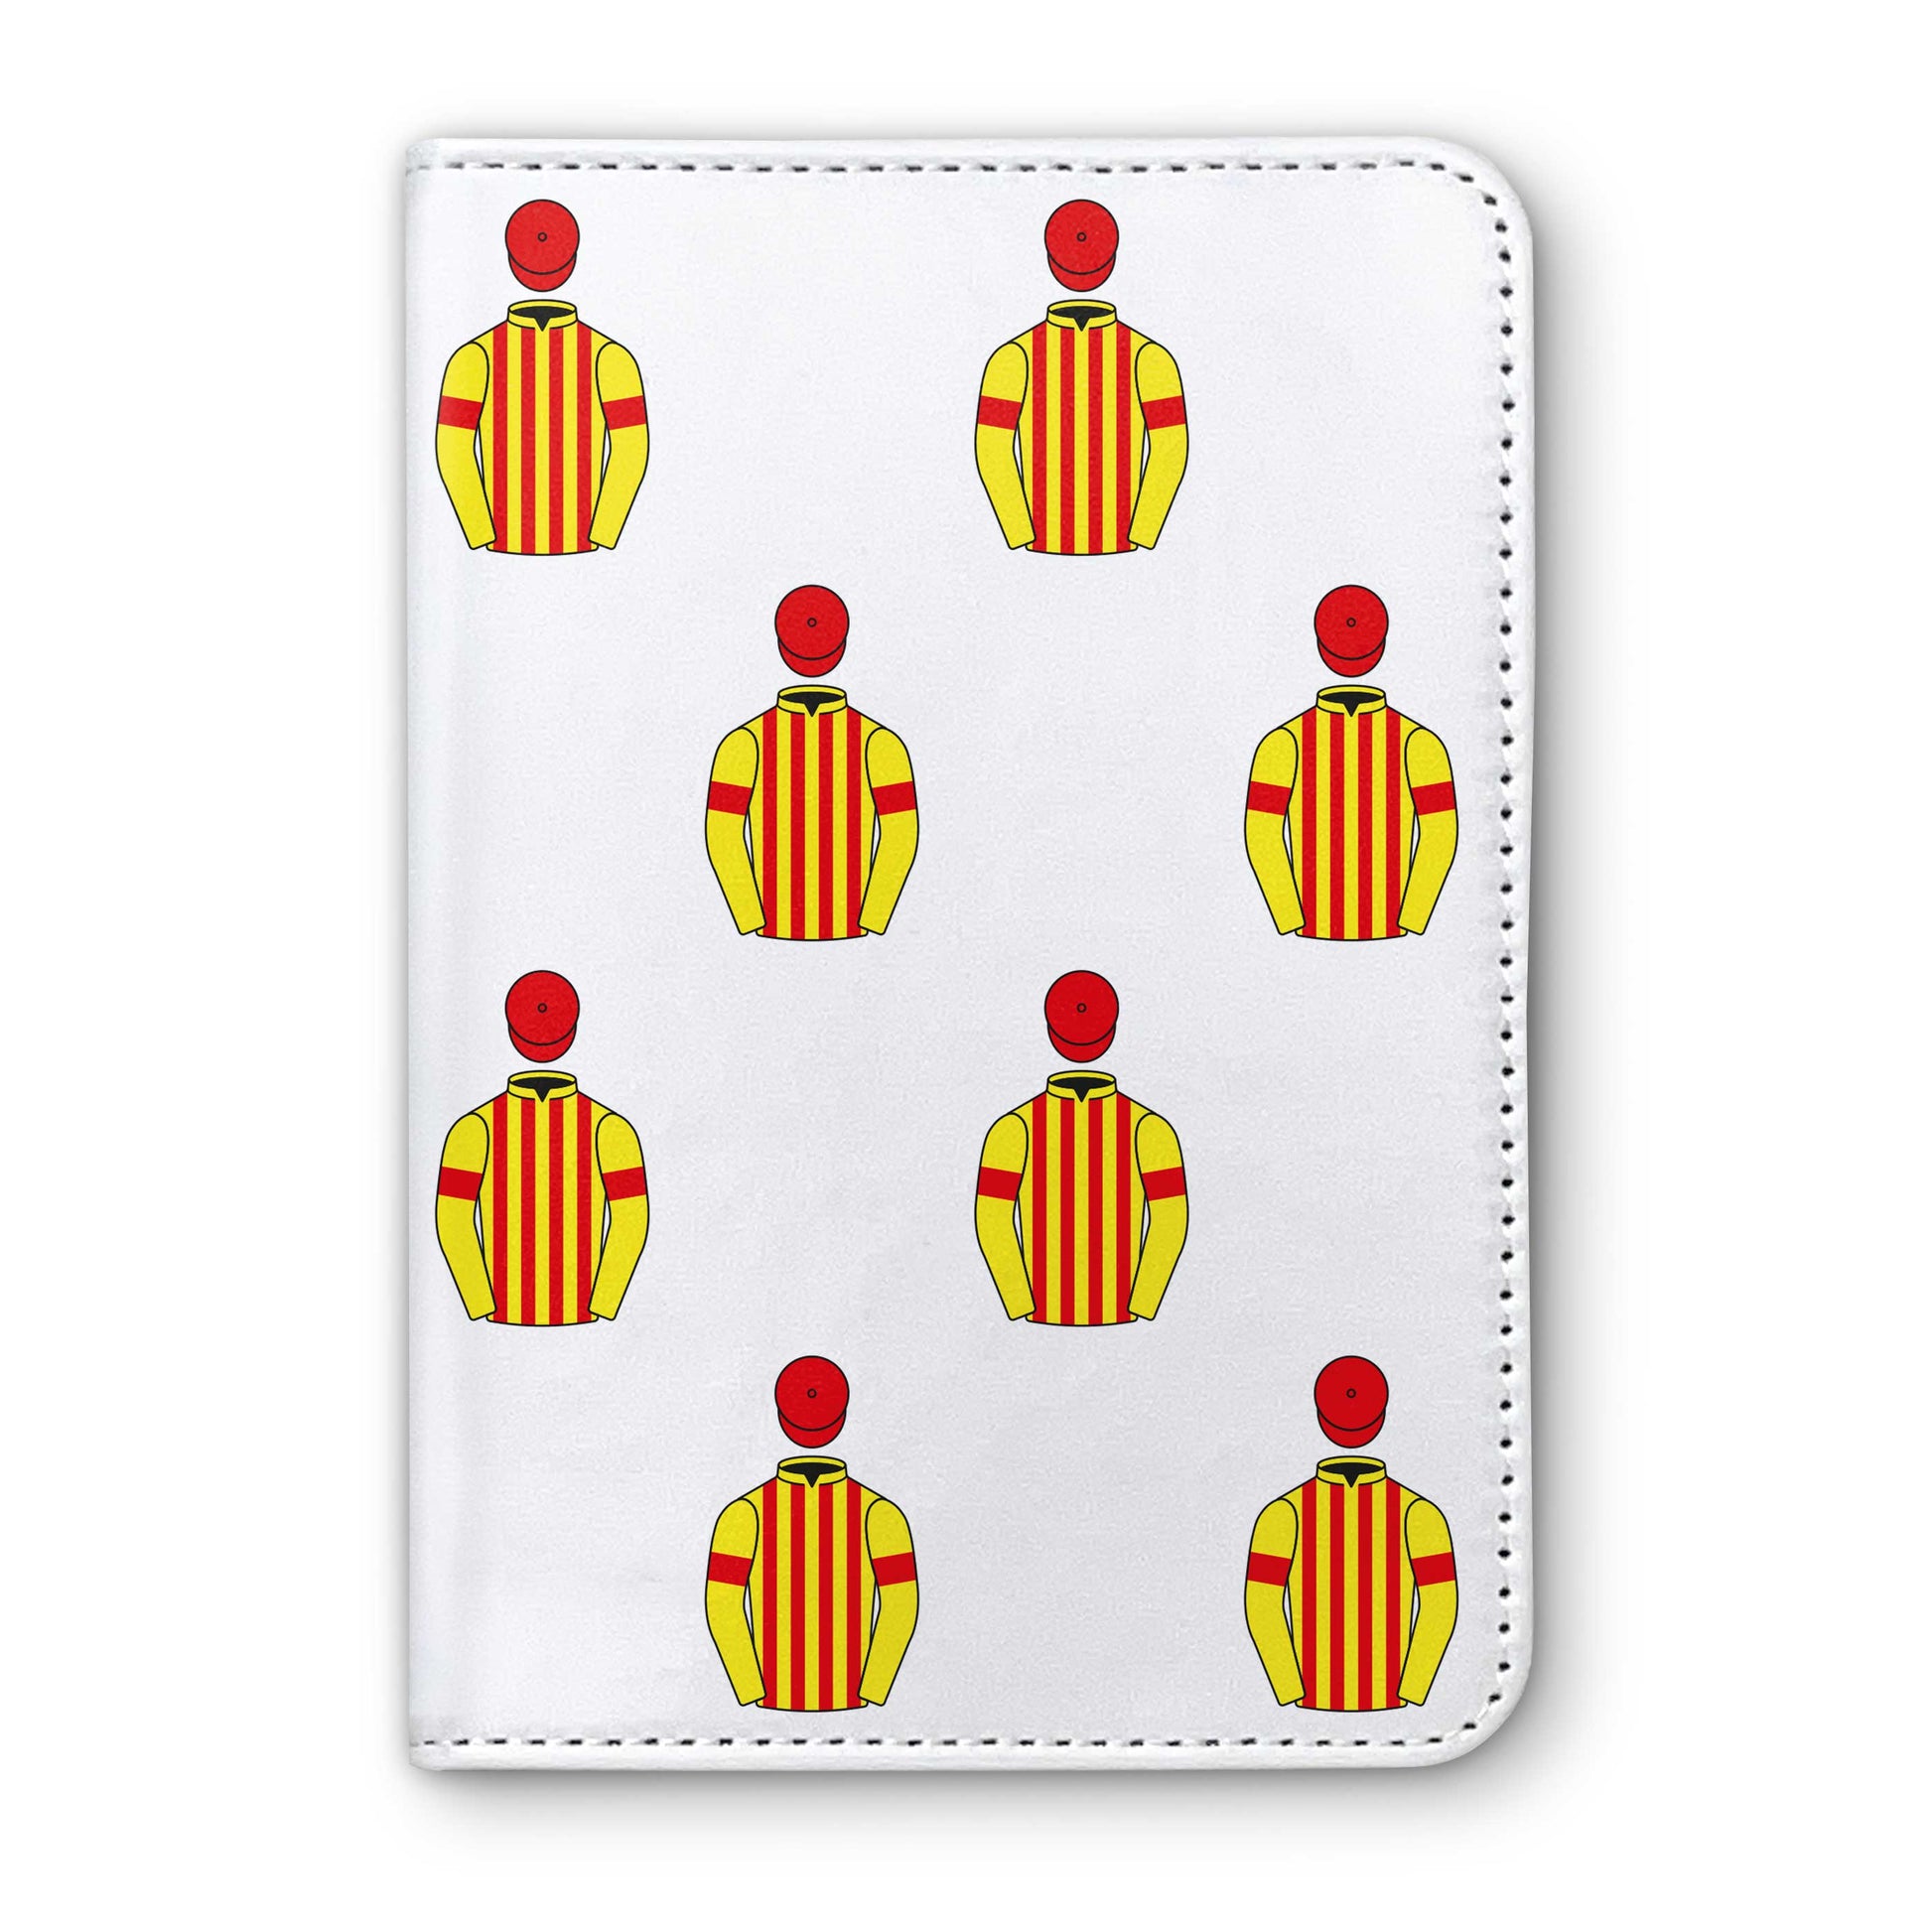 The Yes No Wait Sorries And Chris Coley Horse Racing Passport Holder - Hacked Up Horse Racing Gifts